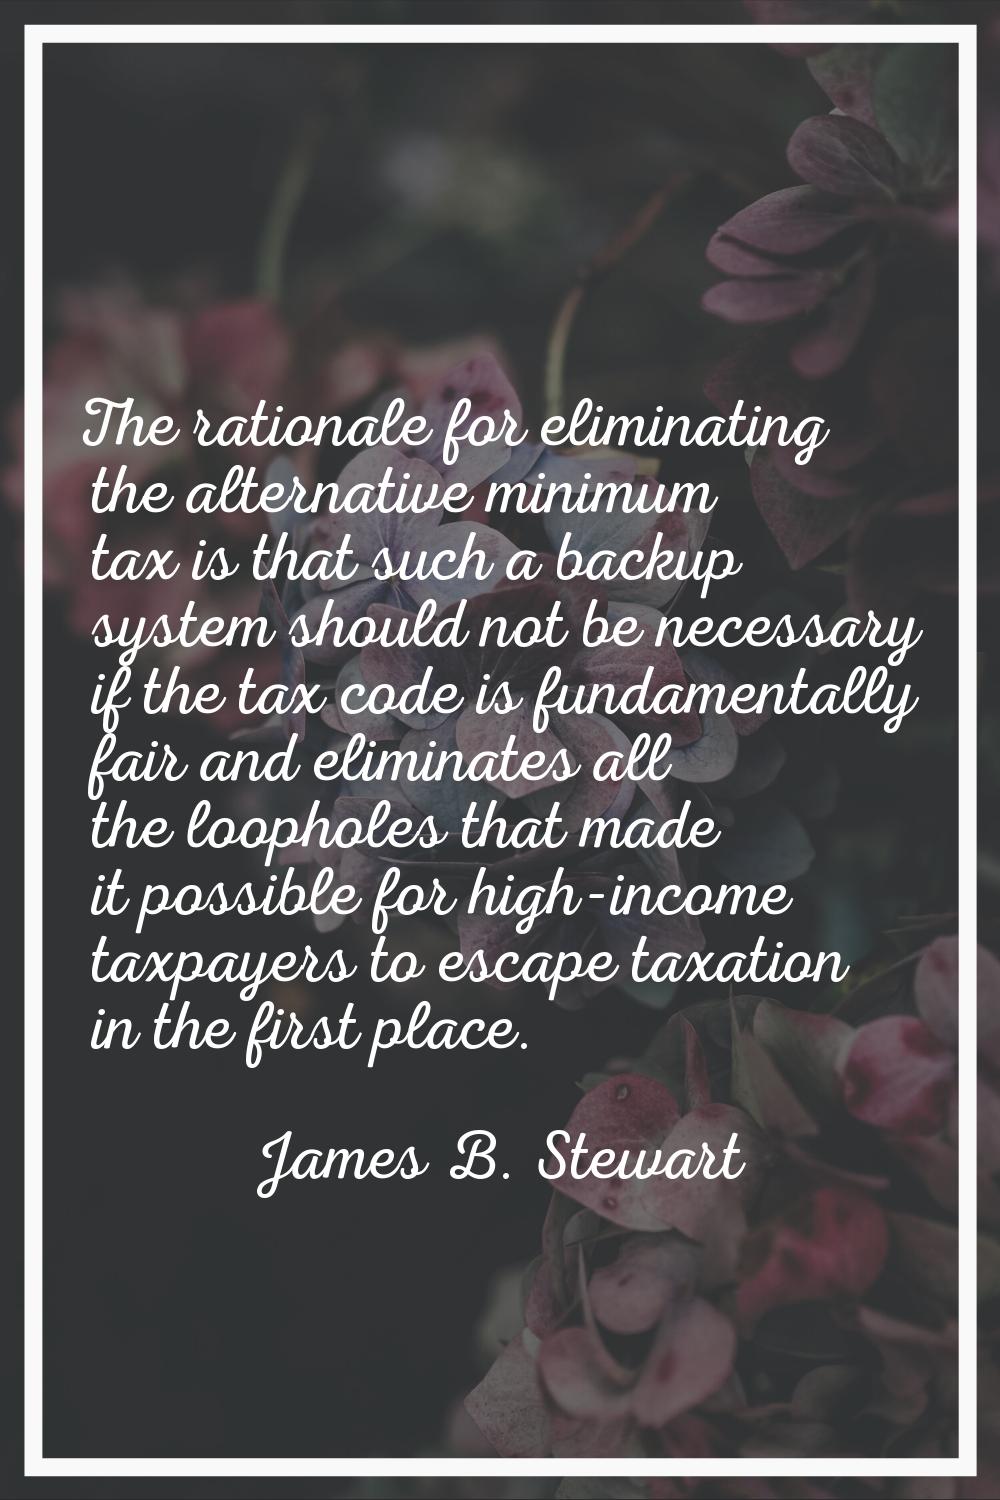 The rationale for eliminating the alternative minimum tax is that such a backup system should not b